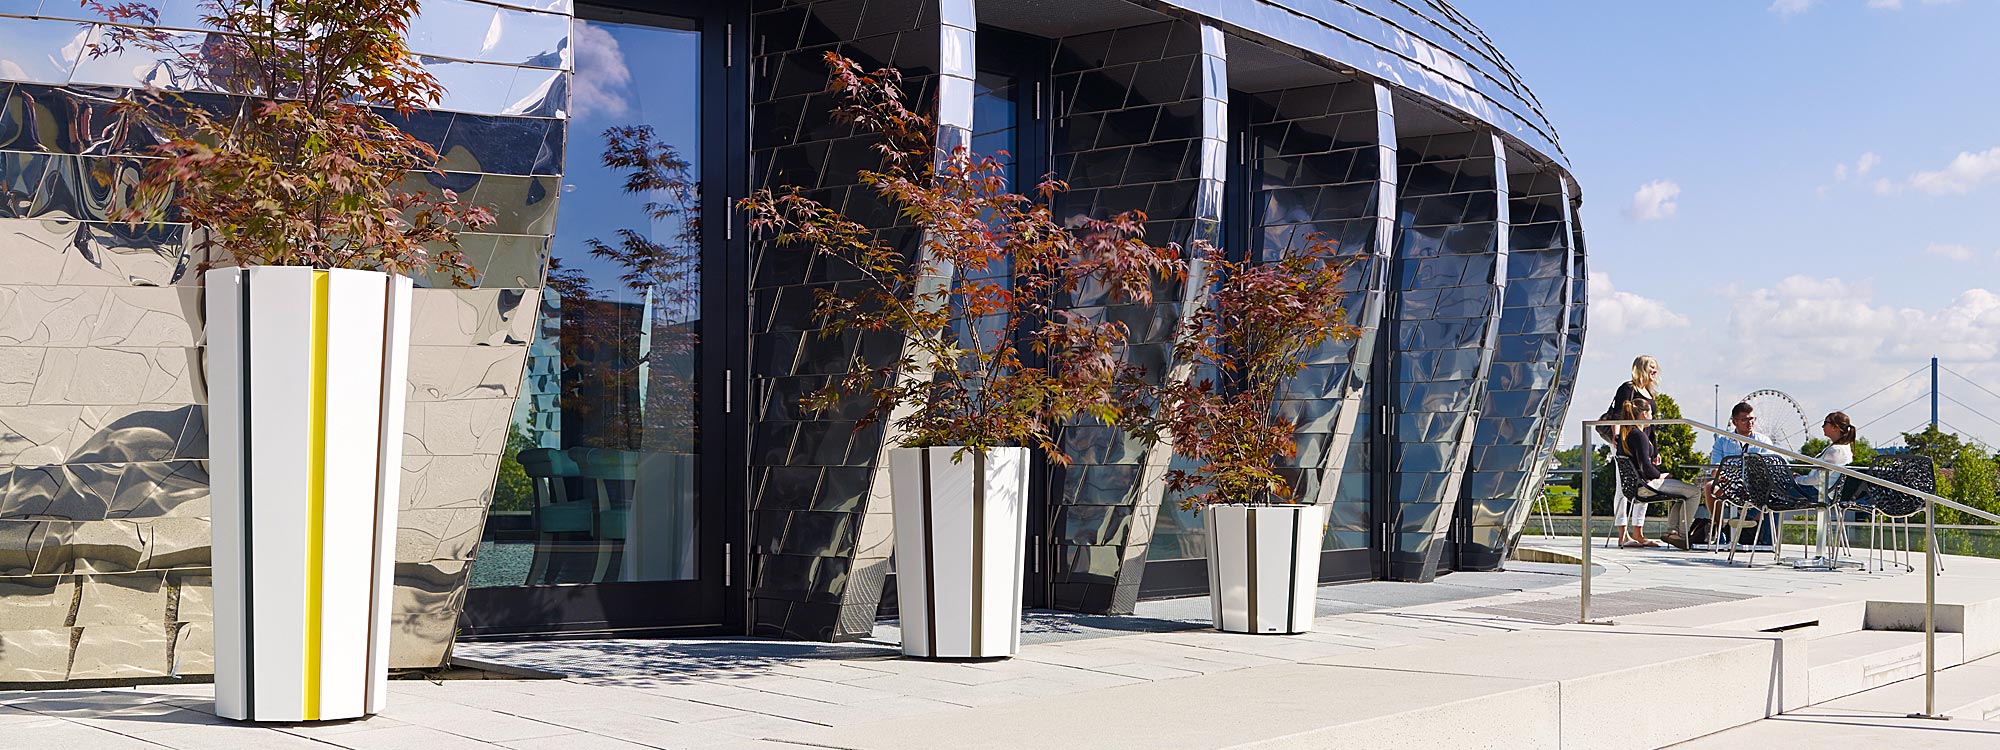 Image of different sizes of Flora Octa geometric planters planted with acer trees, shown on sunny terrace outside curvy & modern building